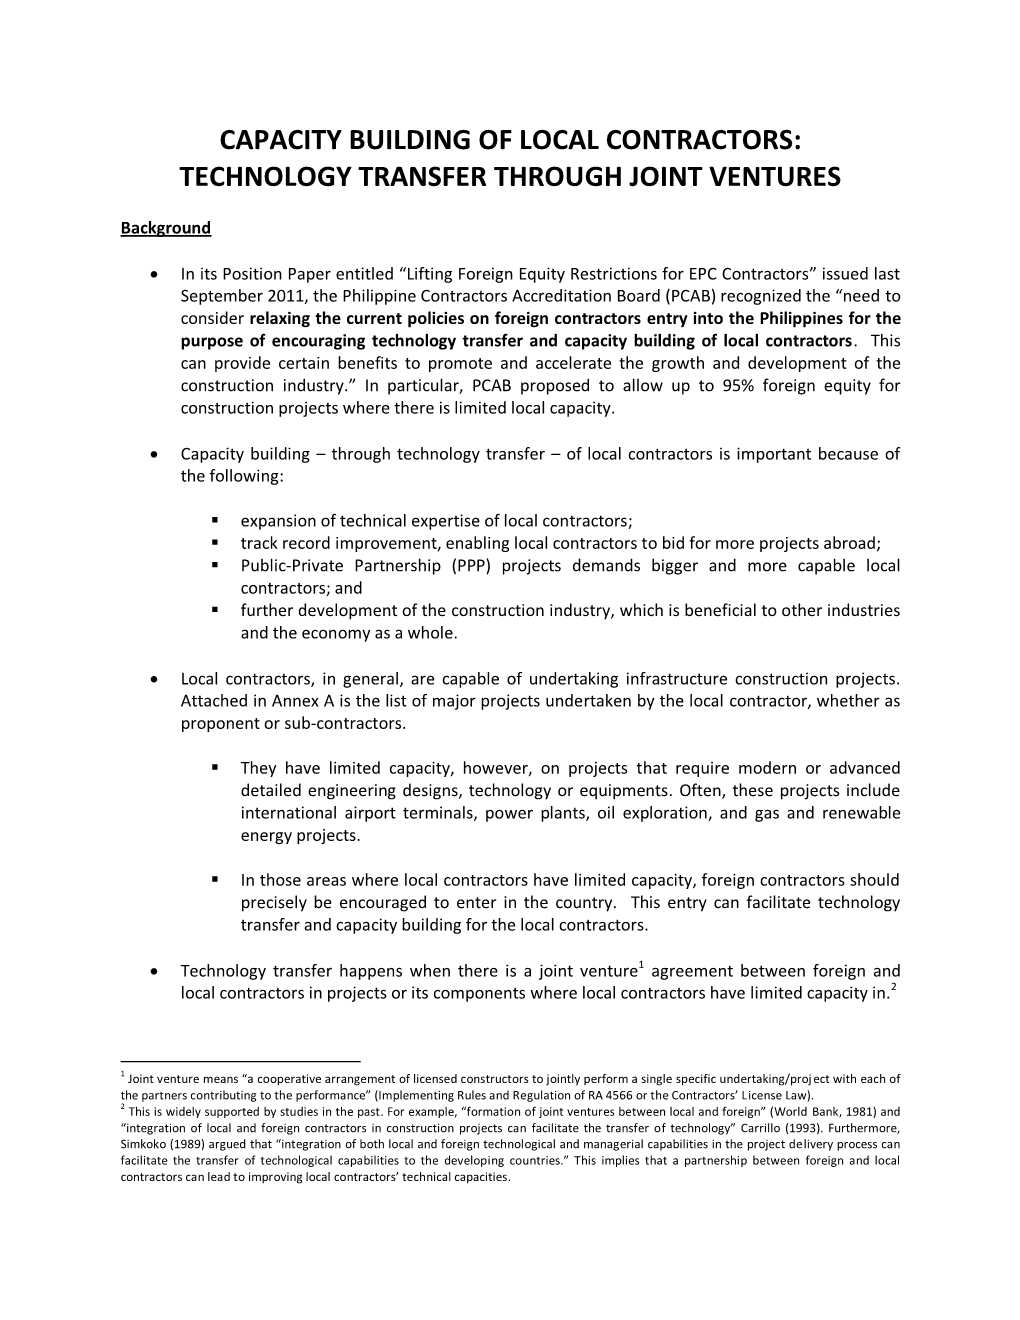 Capacity Building of Local Contractors: Technology Transfer Through Joint Ventures